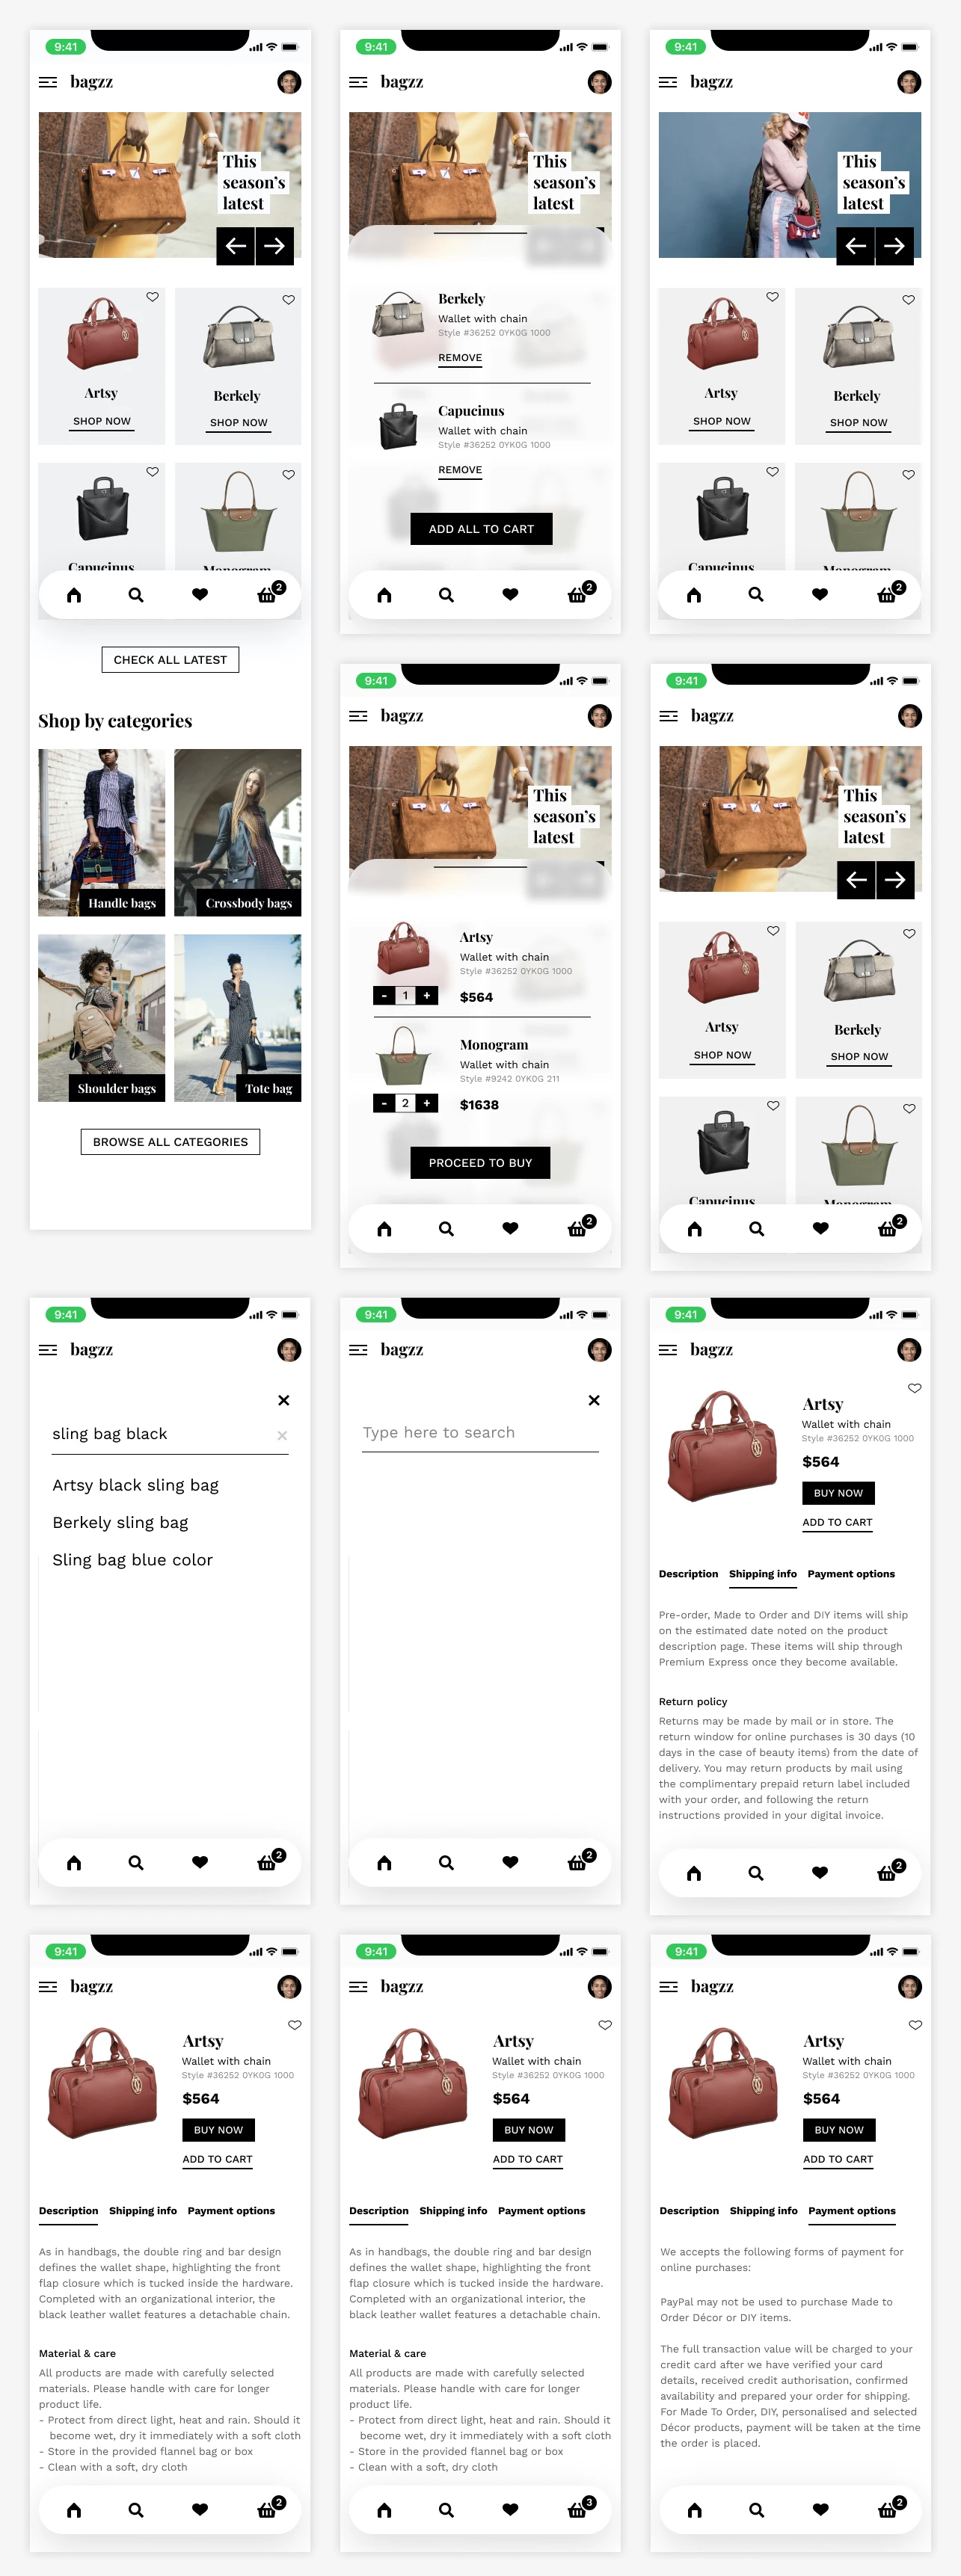 Bagzz - Free Shopping UI Kit for Figma - Bagzz is a minimal & modern shopping app UI kit. This free UI kit has basic app screens and prototypes to get you started.